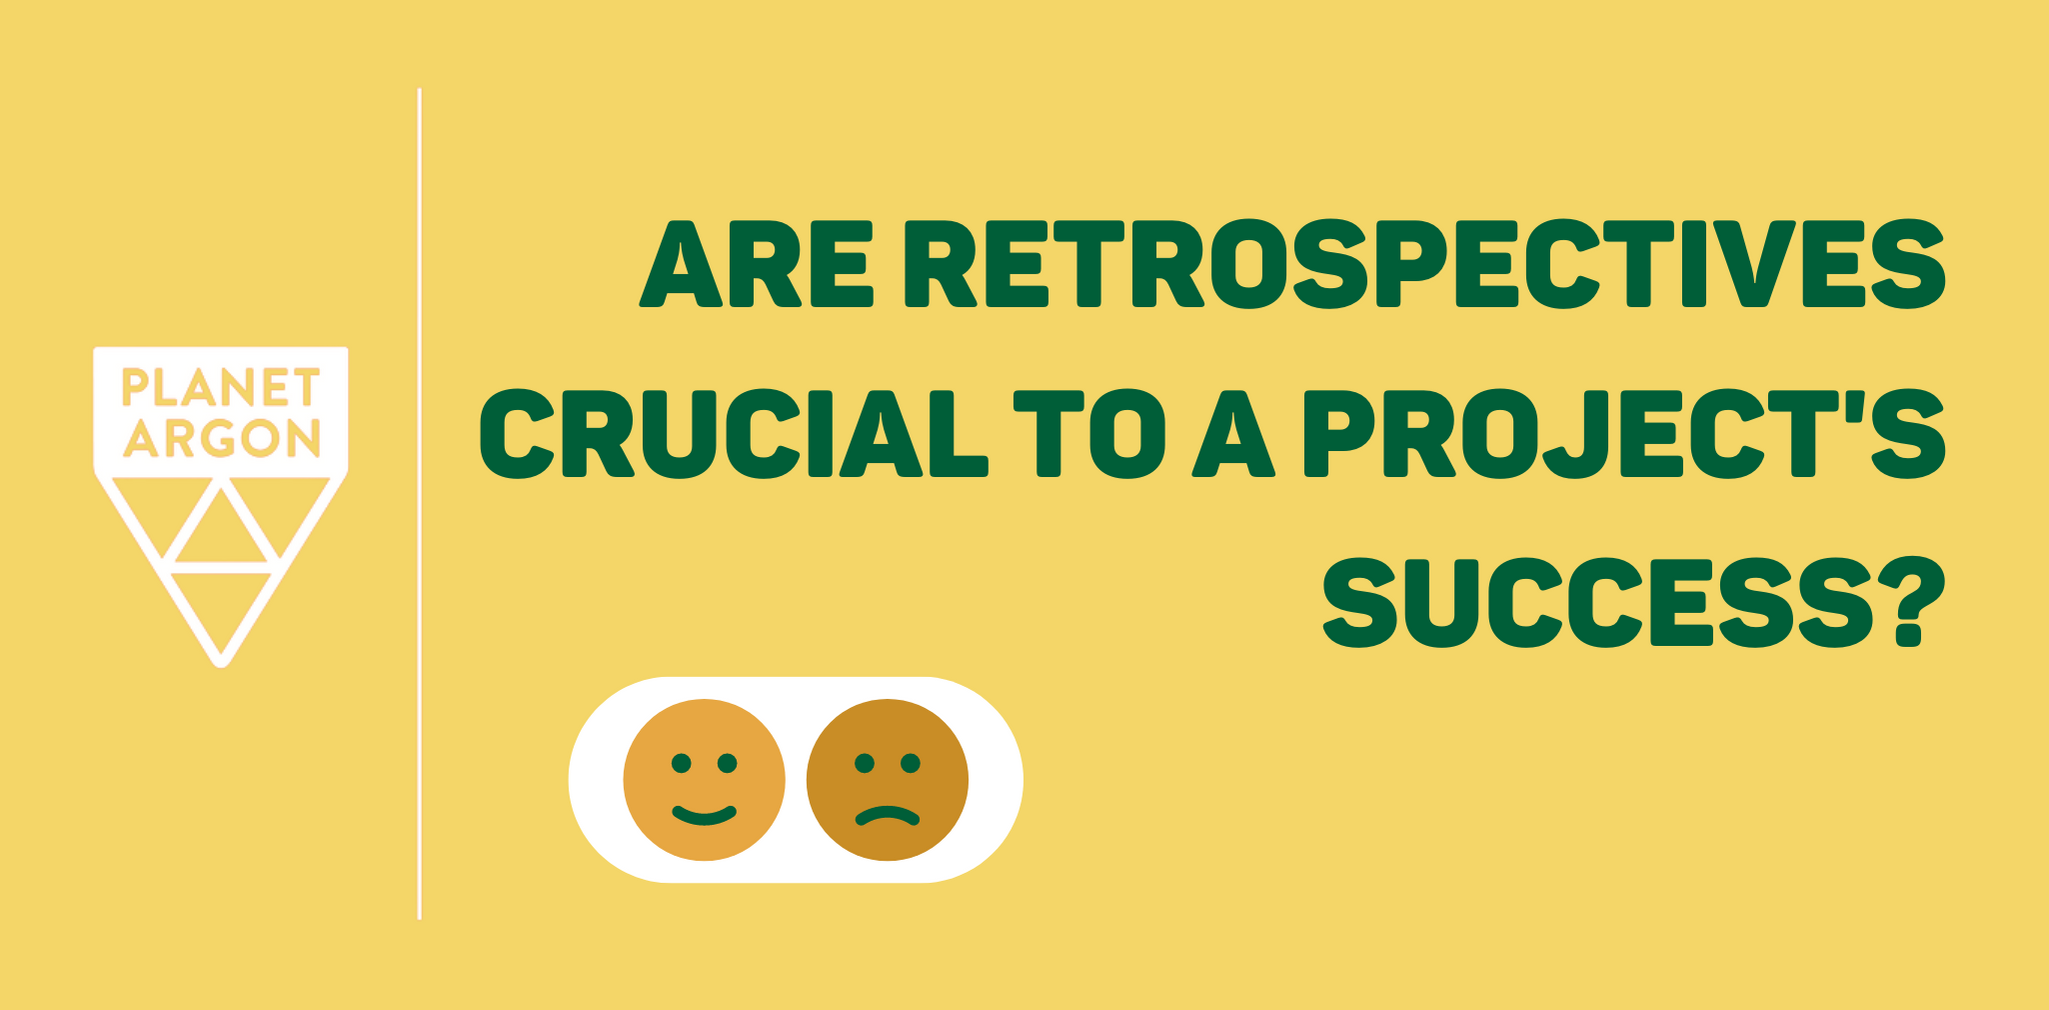 Are Retrospectives Crucial to a Project's Success?